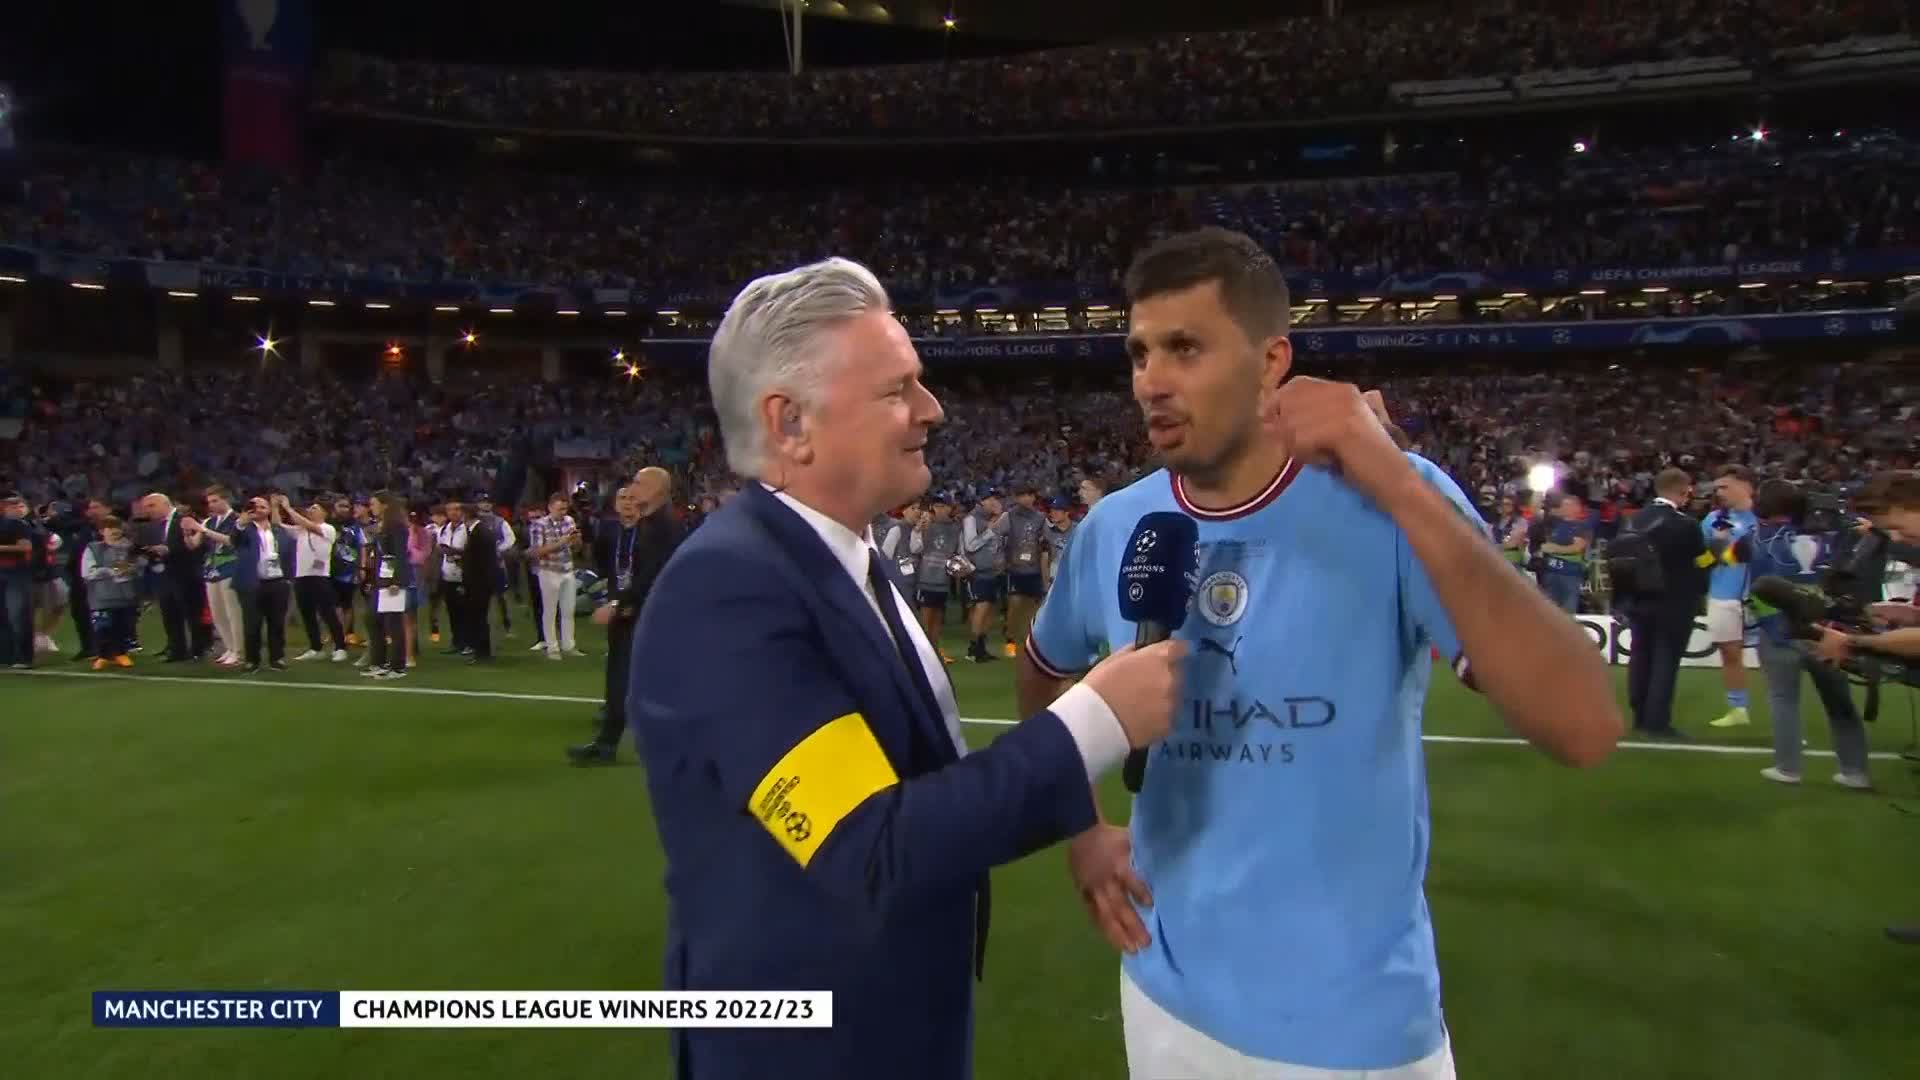 Video: Manchester City’s Rodri swears on live TV during post-match interview